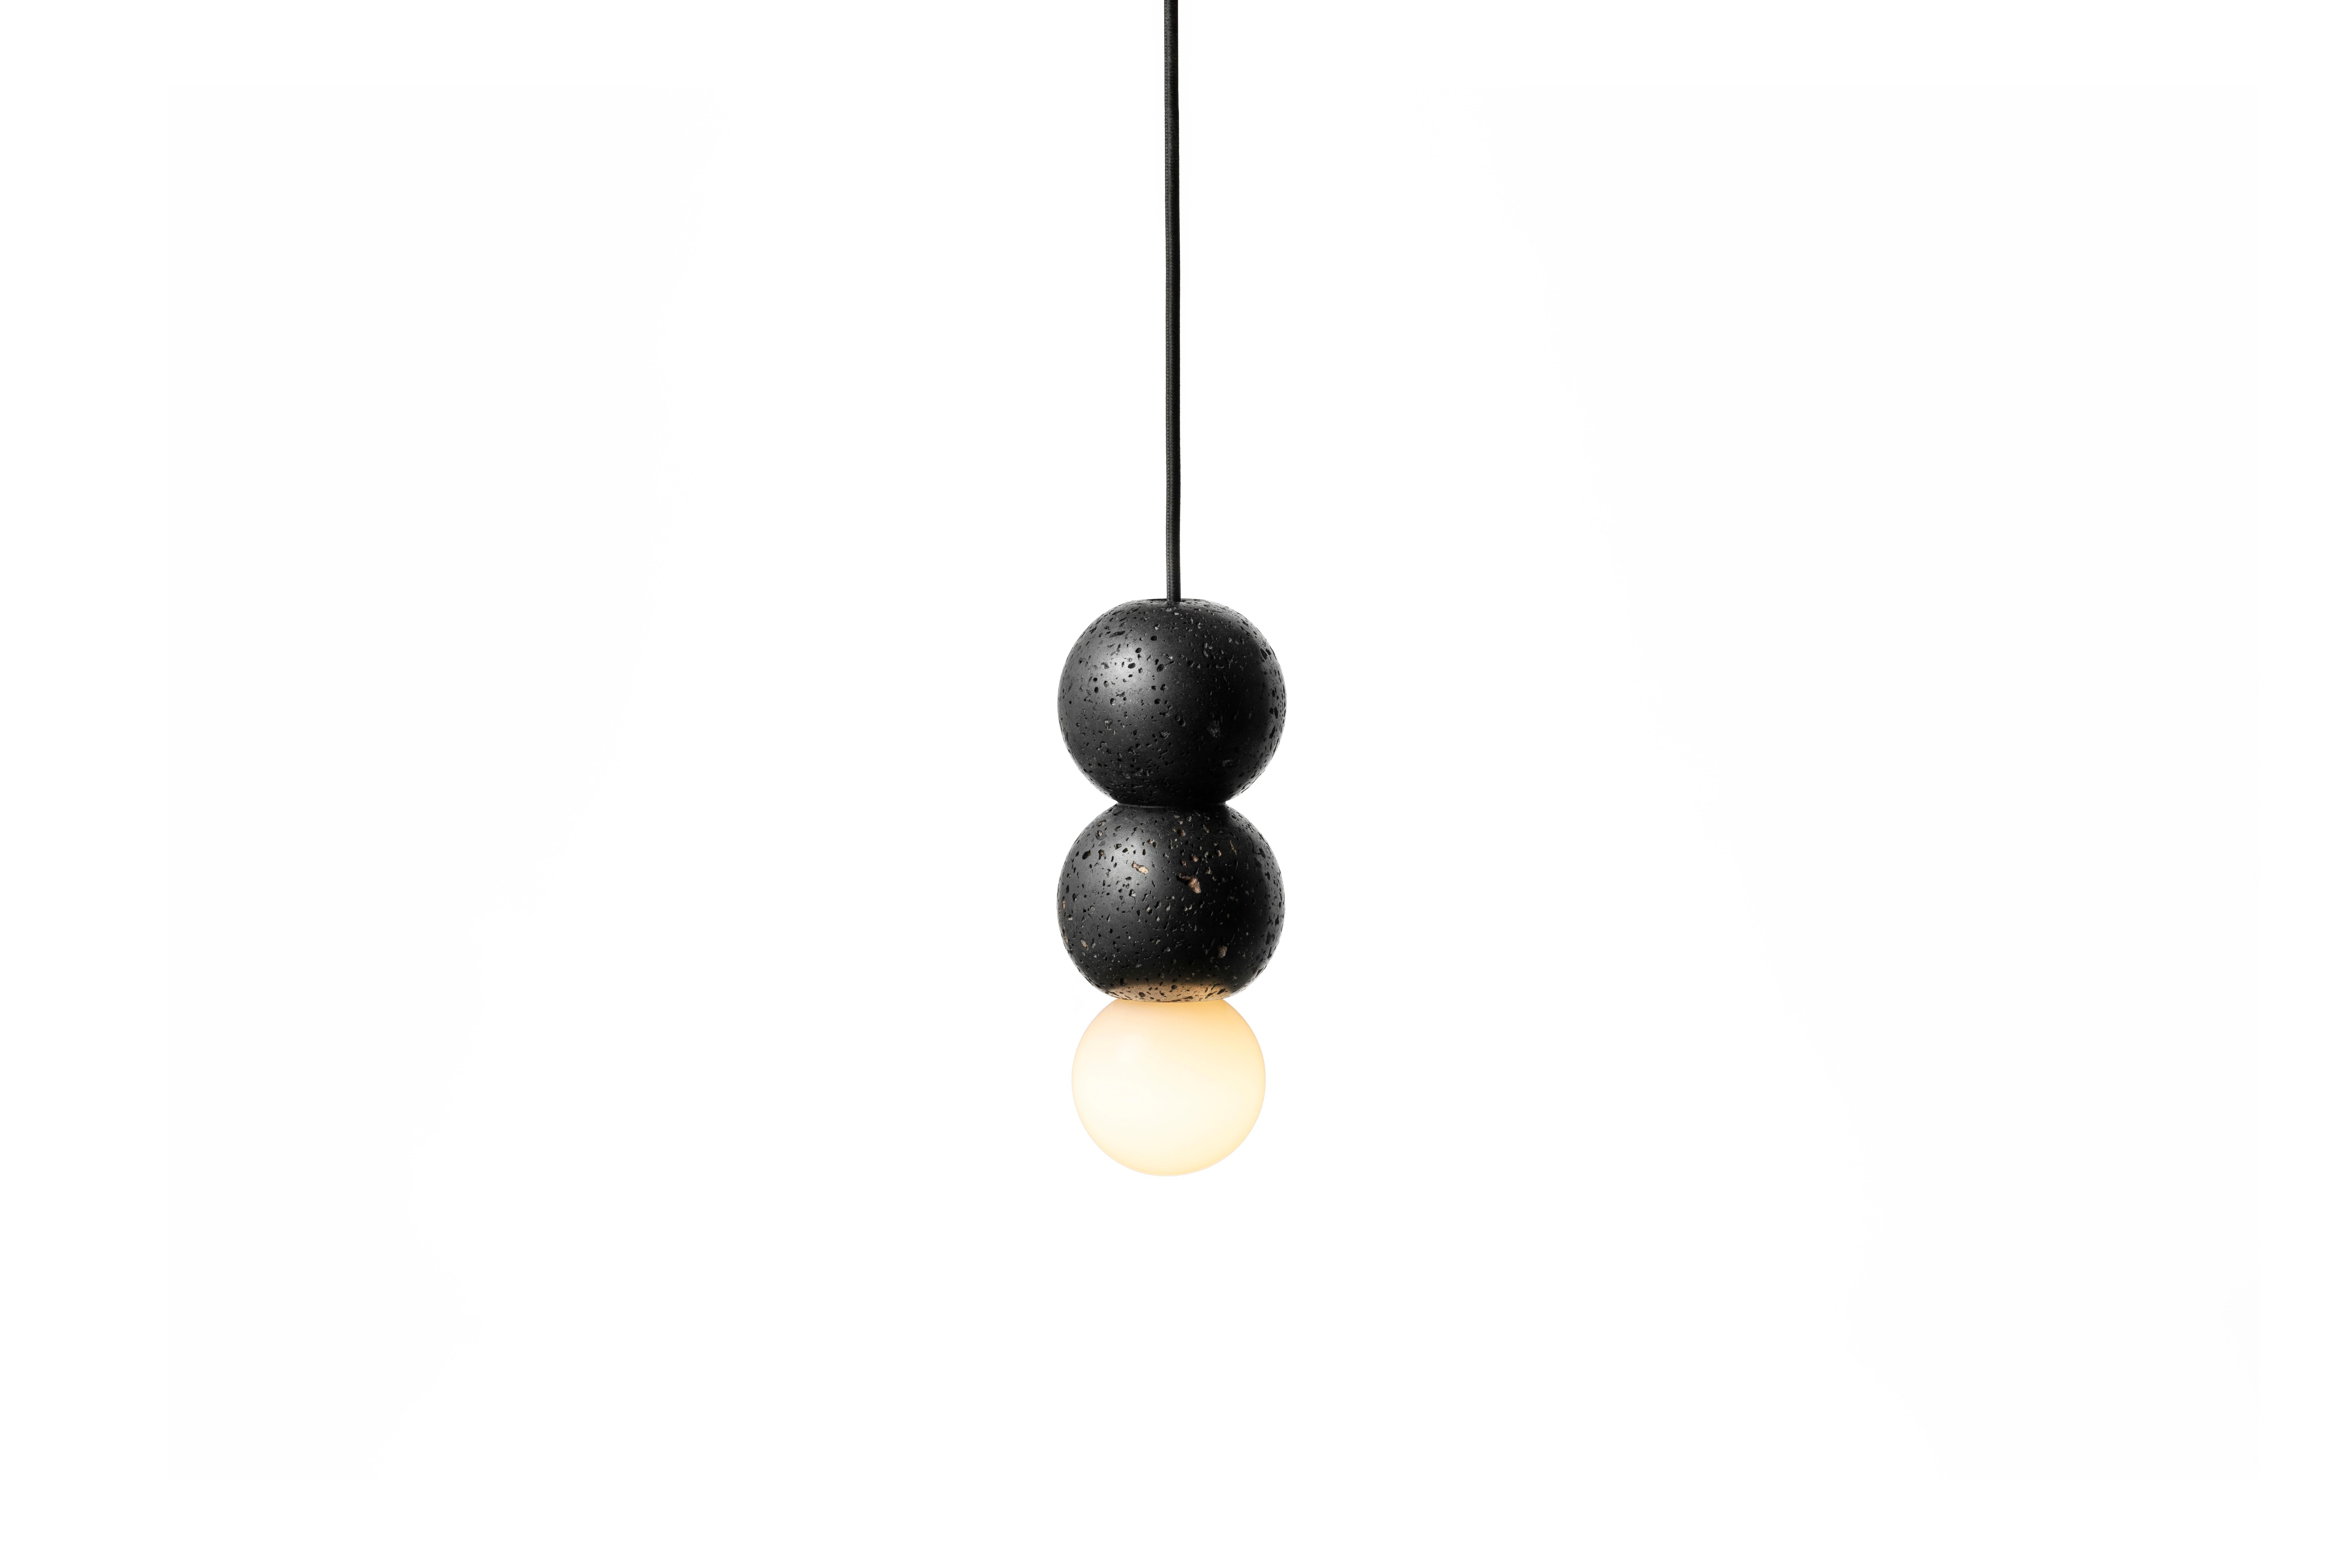 Pendant lamp 'OOPS' by Buzao x Bentu design.
Black lava stone

Size: 24 cm high, 9 cm diameter
Wire: 2 meters black (adjustable)
Lamp type: E27 LED 3W 100-240V 80Ra 200LM 2700K - Comptable with US electric system.
Ceiling rose: 6.5cm diameter